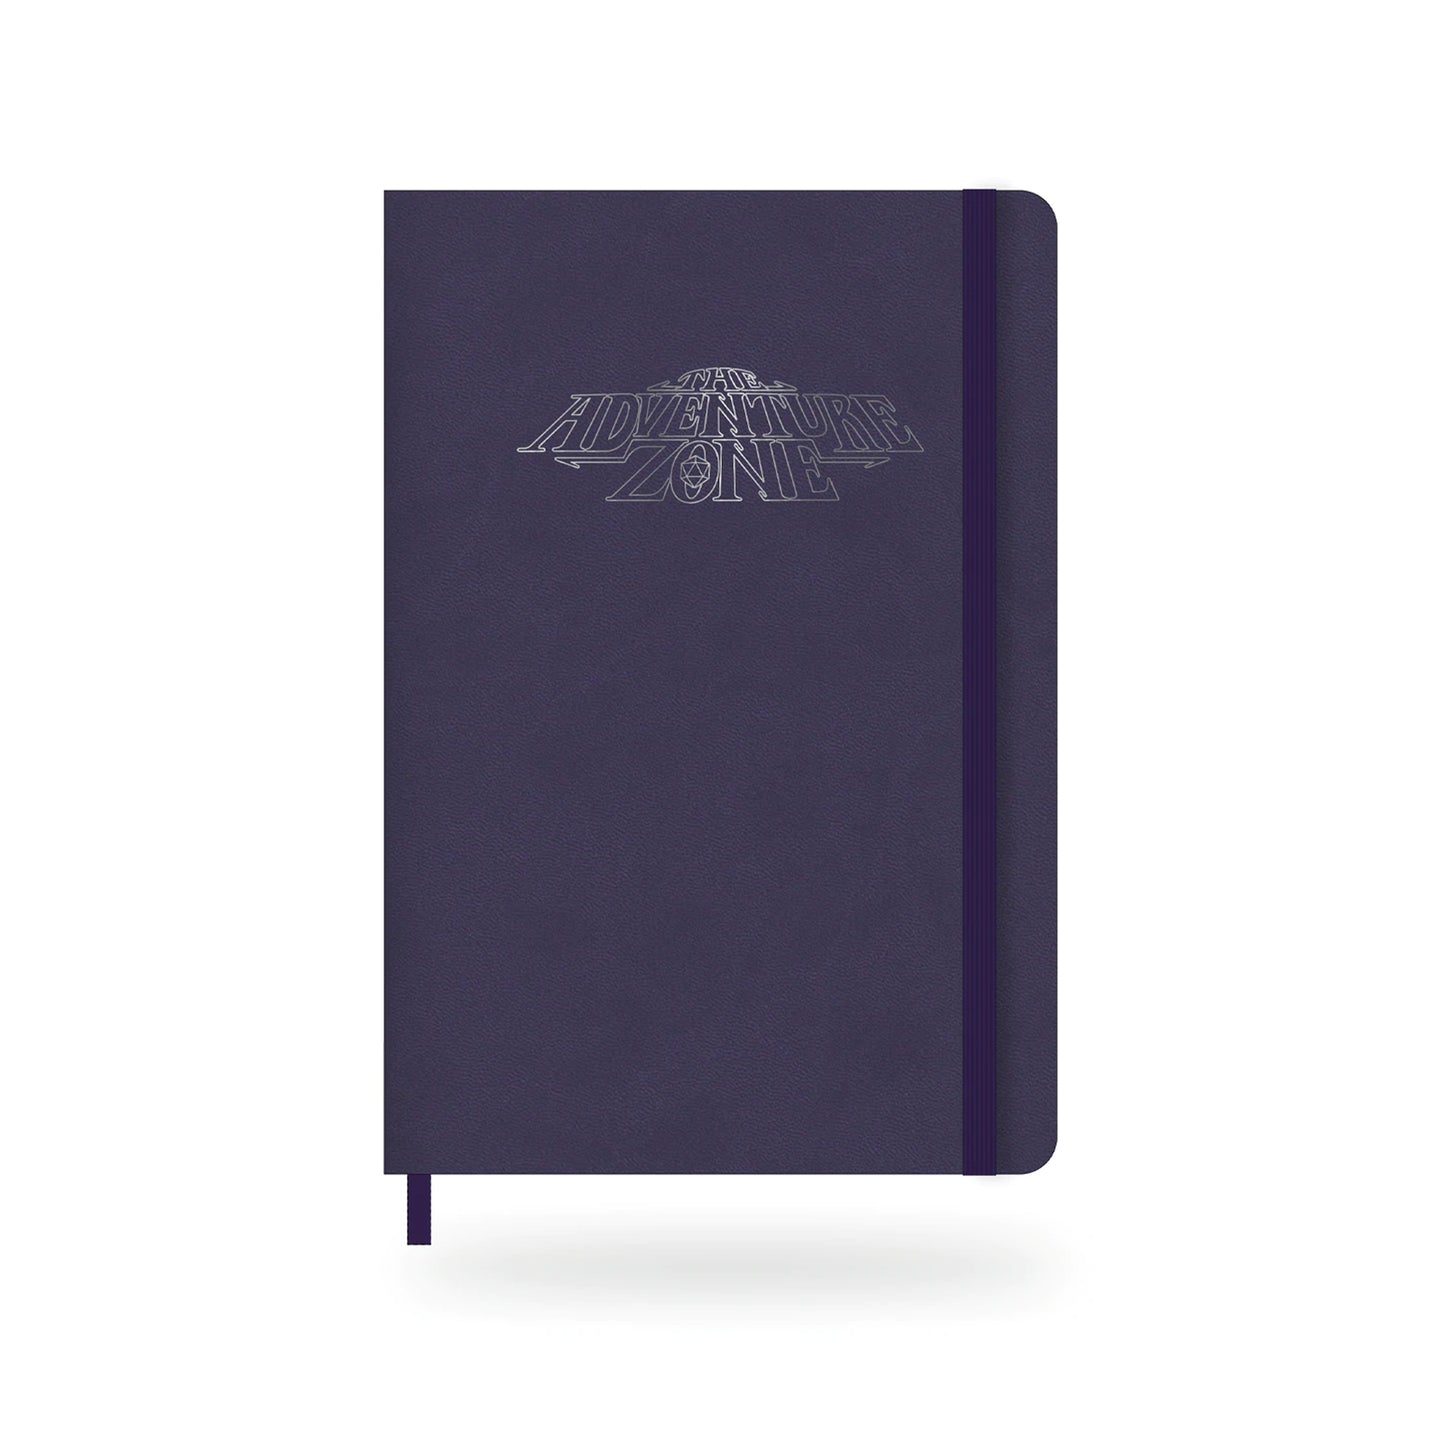 A purple notebook embossed with the TAZ logo. It has an elastic band holding it shut.